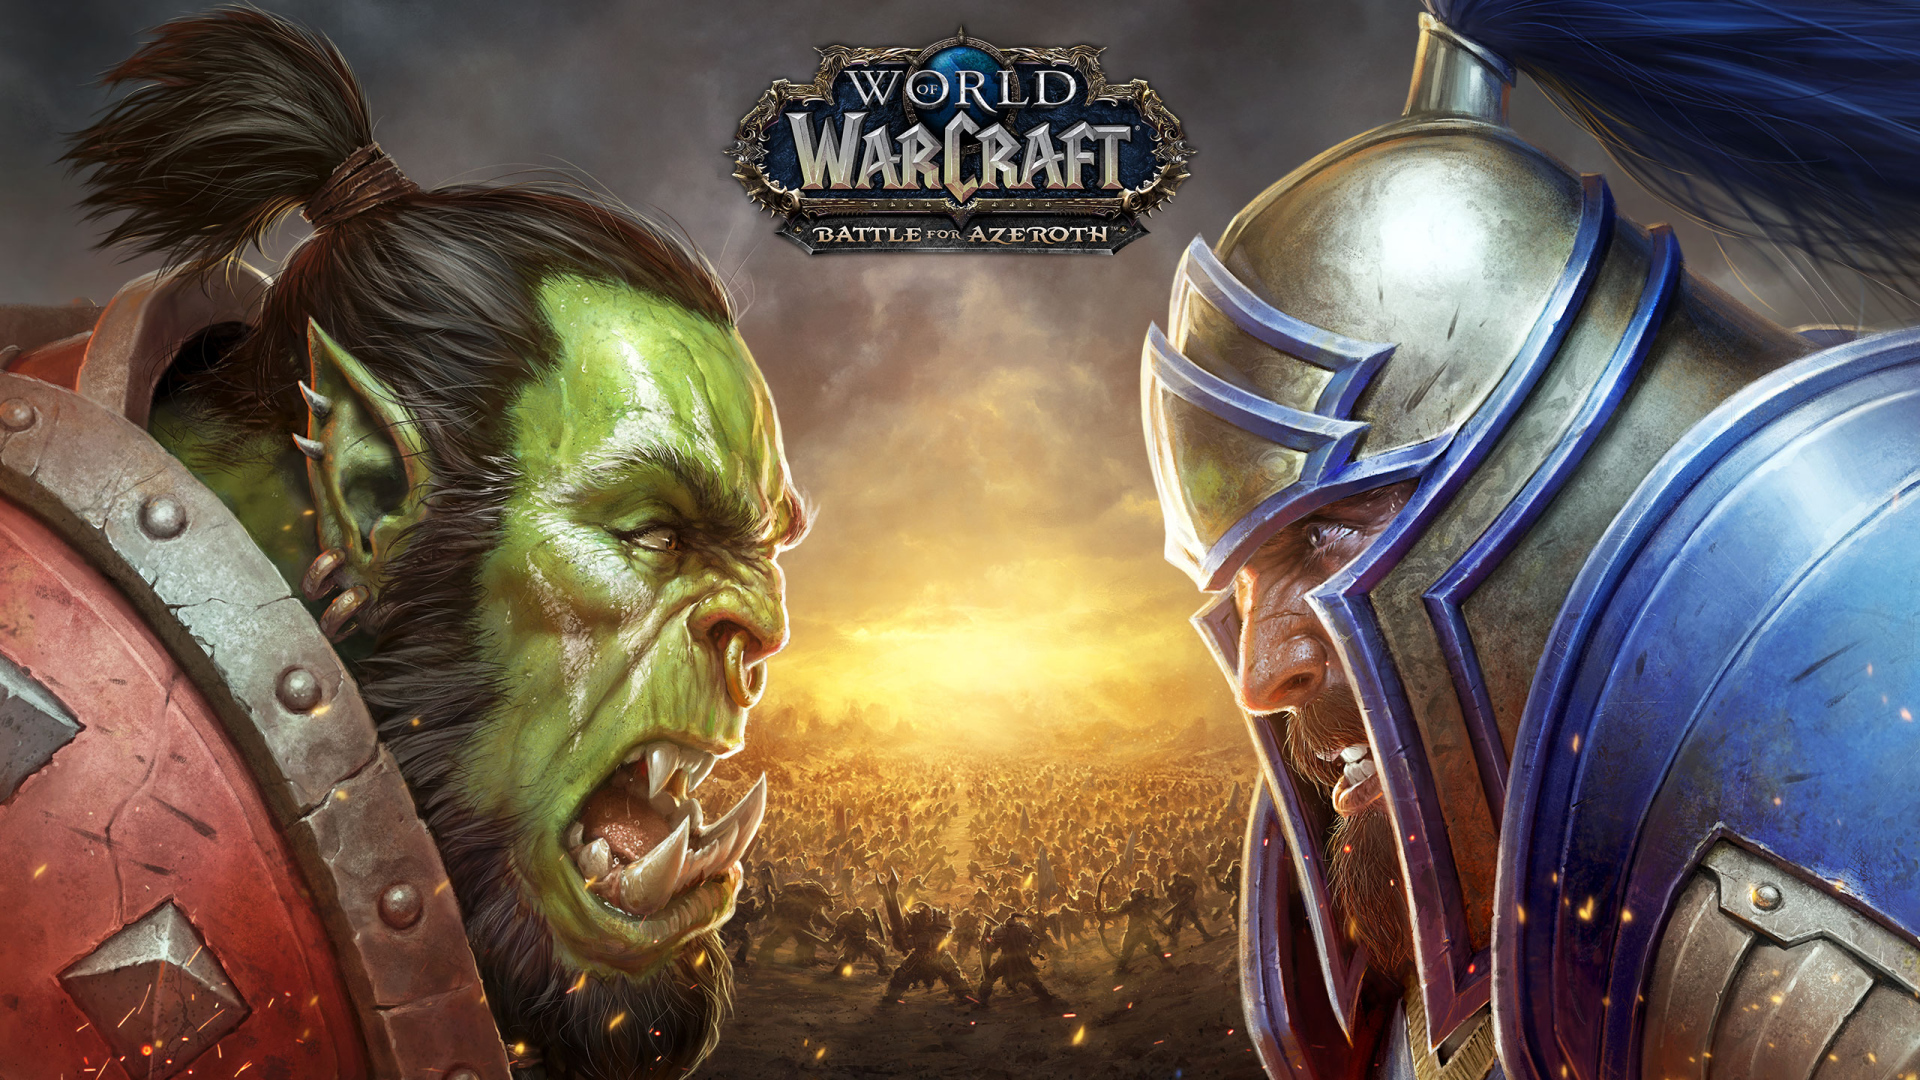 Poster of the new computer game World of Warcraft. Battle for Azeroth, 2018